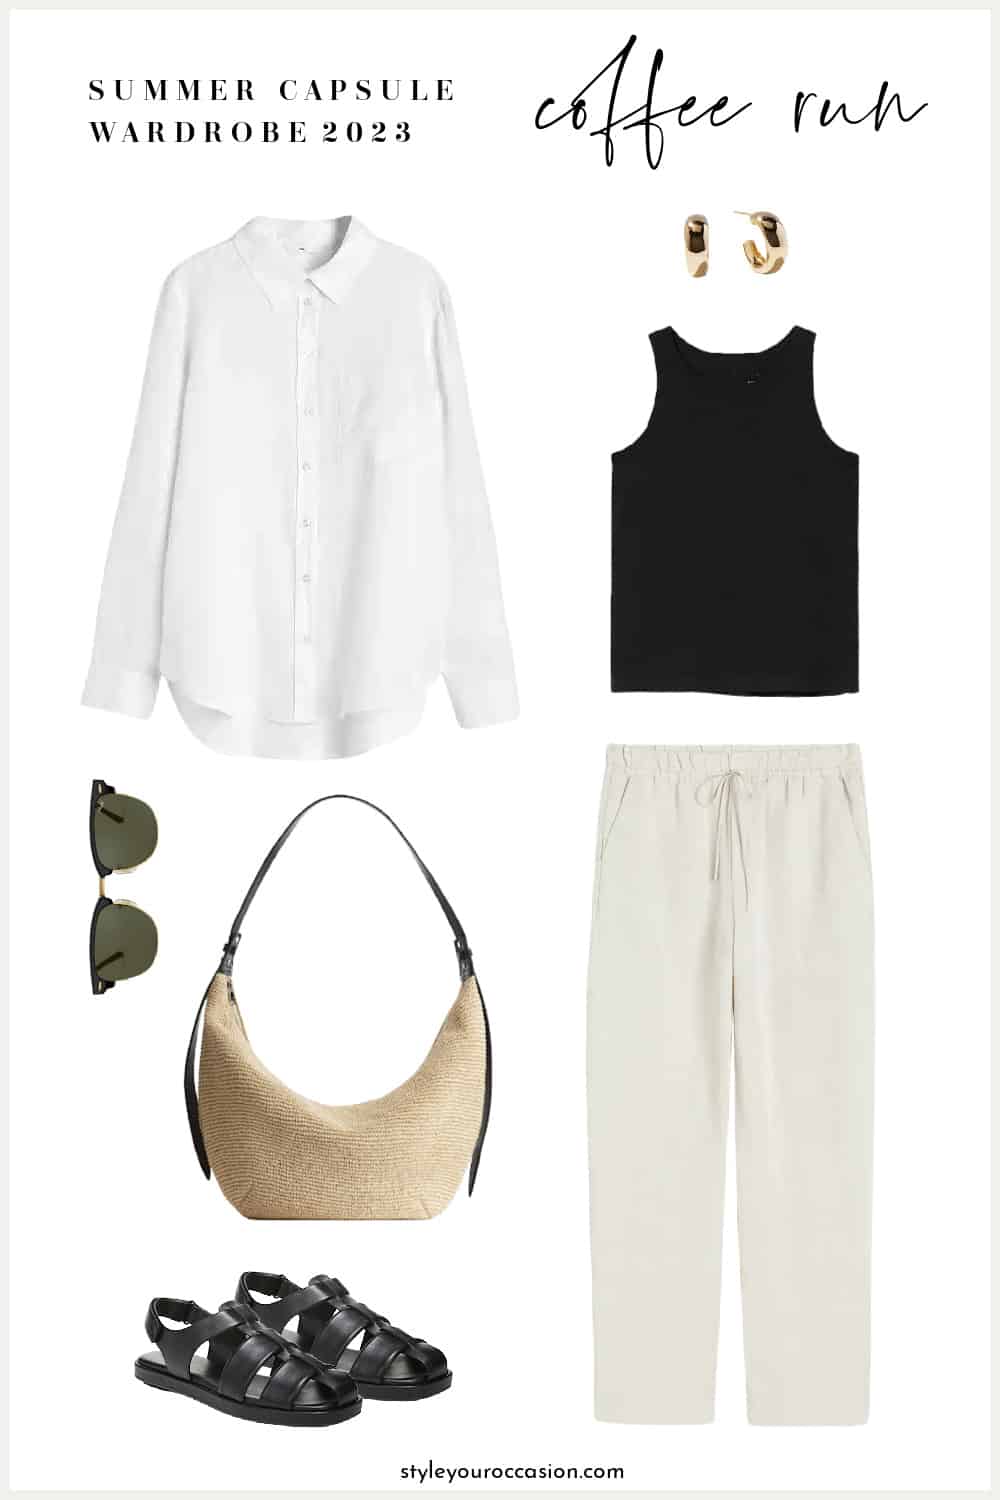 outfit mood board for a summer capsule wardrobe with a white button-down shirt, black tank, linen trousers, straw tote, sunglasses, earrings, and black fisherman sandals